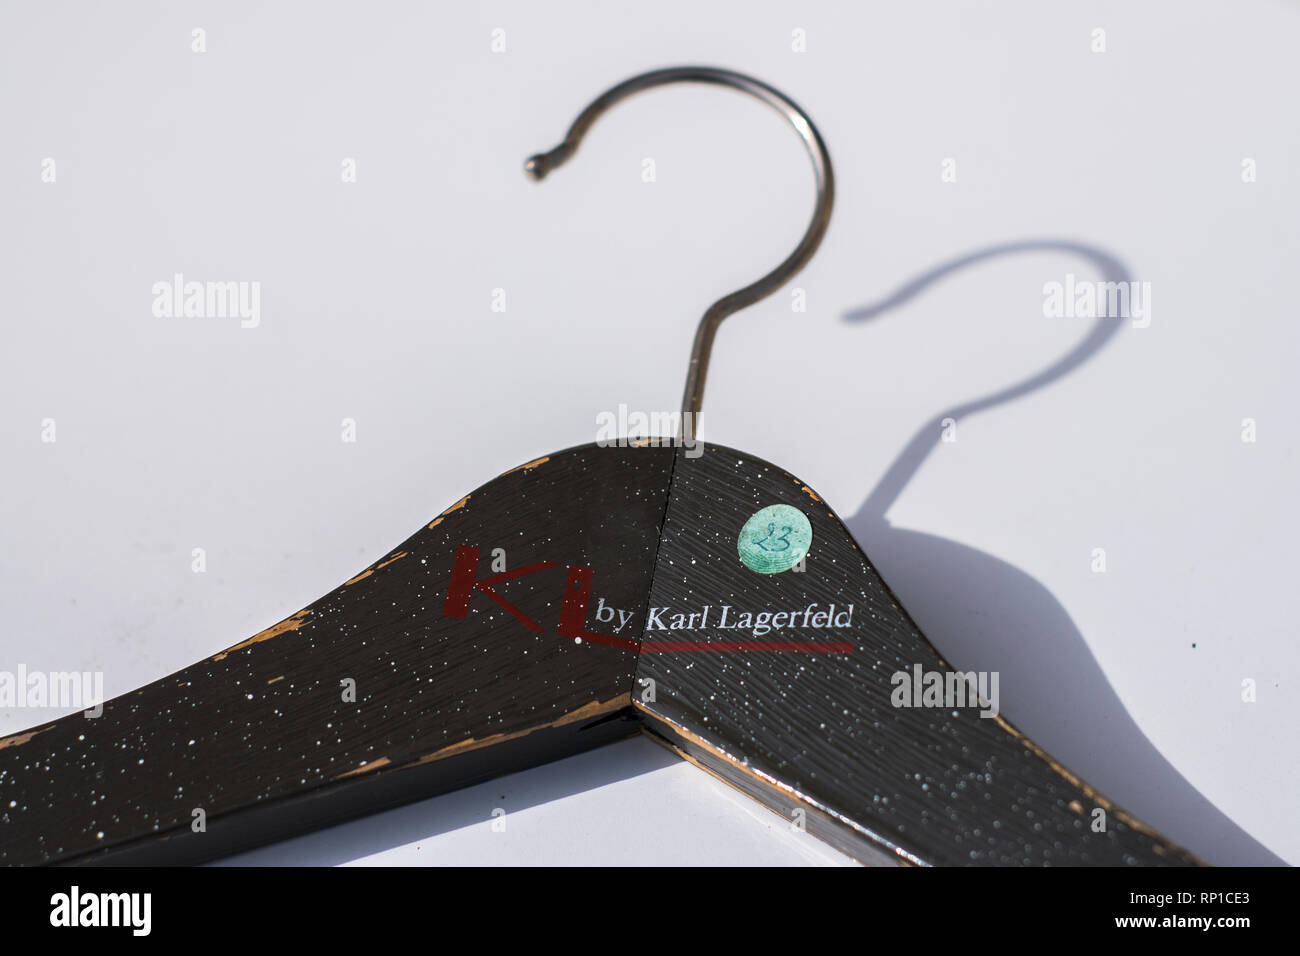 KARL LAGERFELD hanger from 23 rue Palestro atelier from the 80's Stock Photo